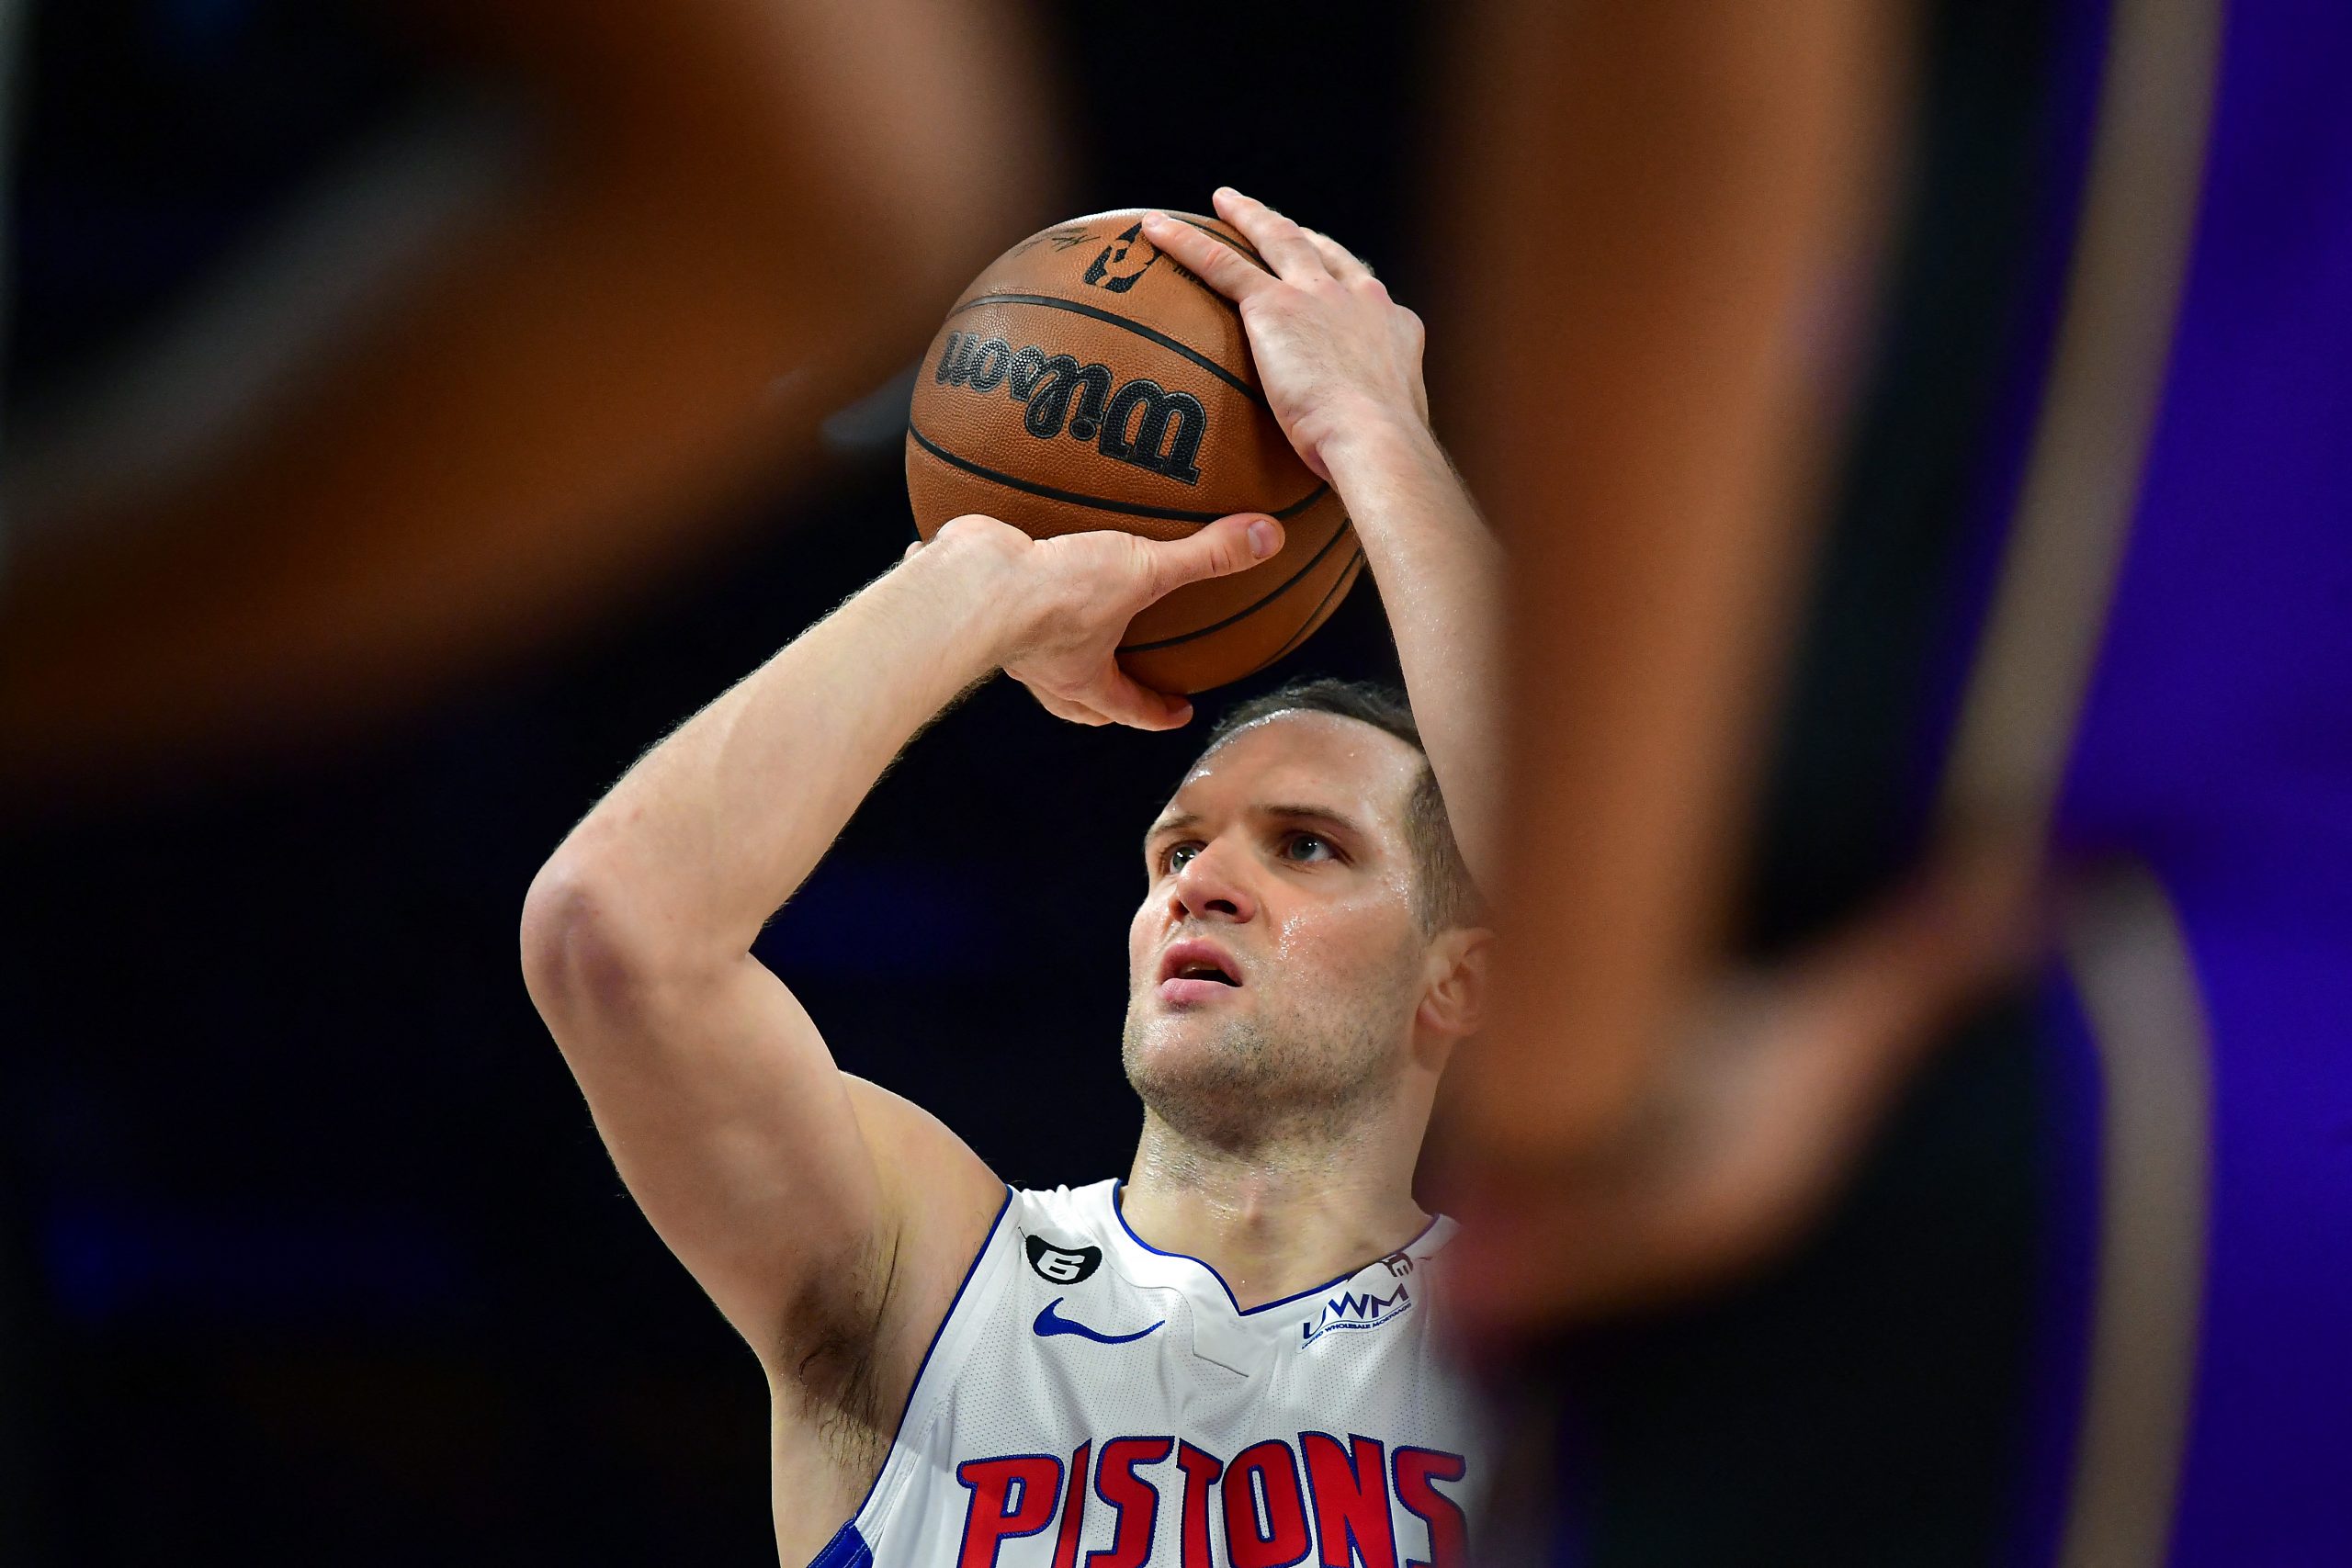 Nov 18, 2022; Los Angeles, California, USA; Detroit Pistons forward Bojan Bogdanovic (44) shoots a free throw against the Los Angeles Lakers during the first half at Crypto.com Arena. Mandatory Credit: Gary A. Vasquez-USA TODAY Sports